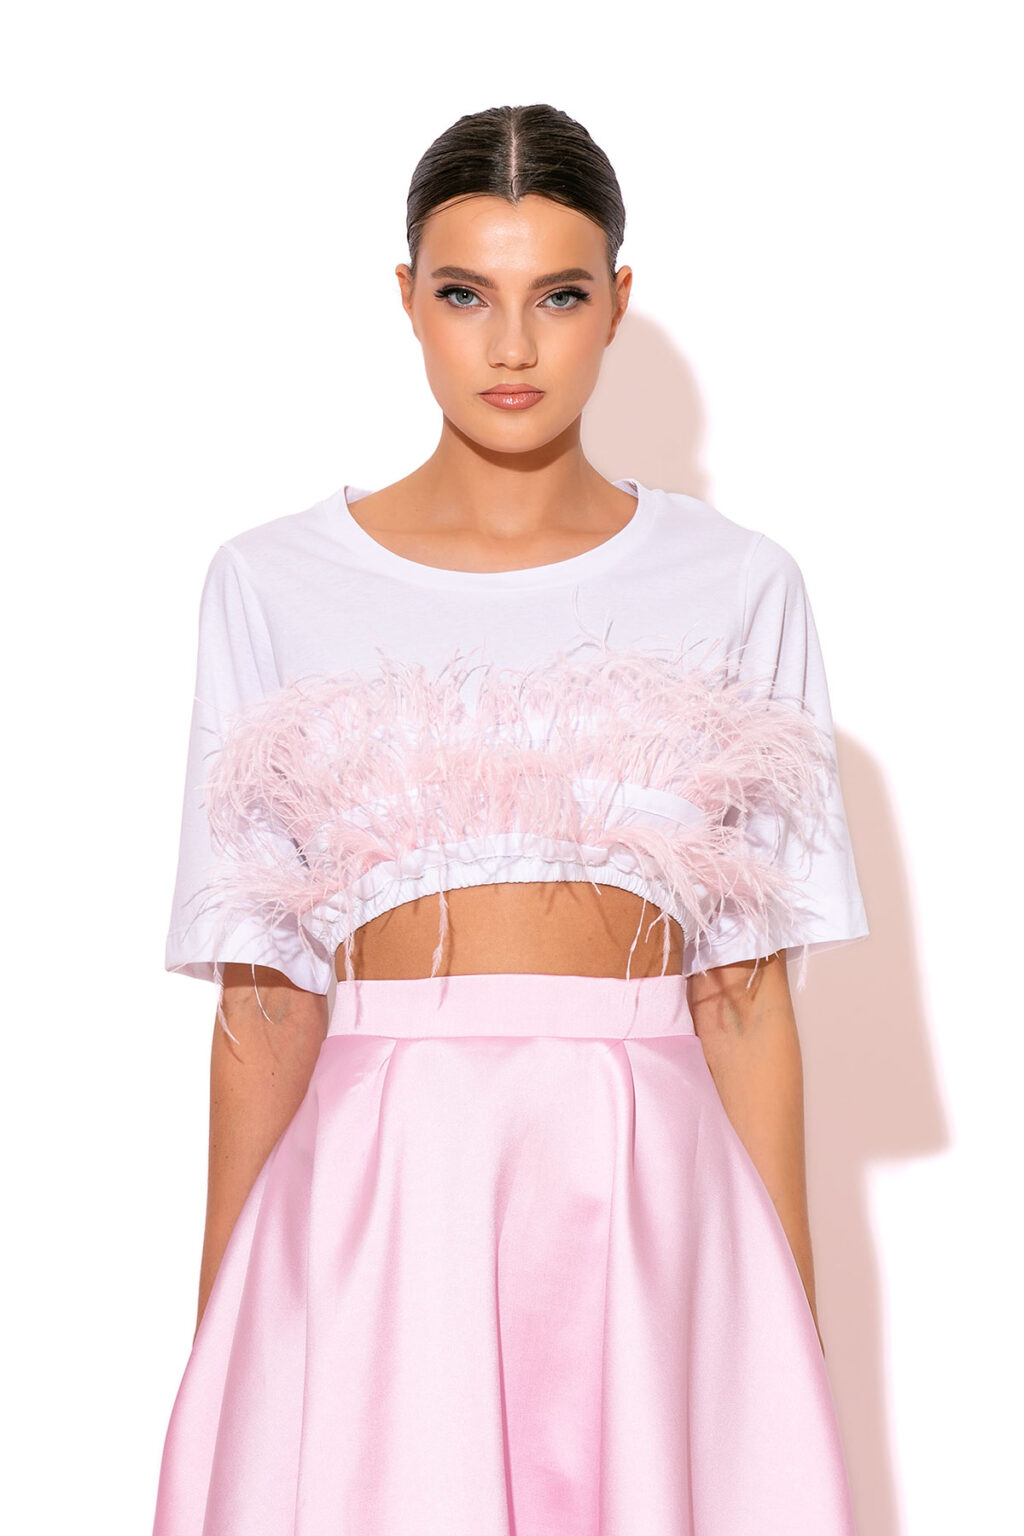 Feather embellished crop T-shirt